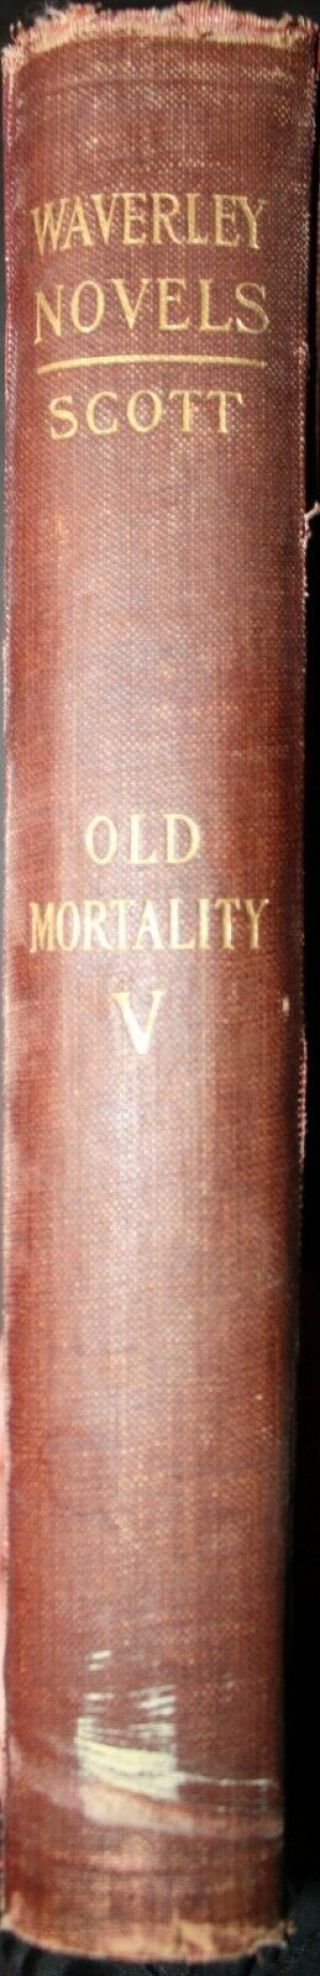 The Waverly Novels By Sir Walter Scott 1900 Old Morality Illustrated Volume 5